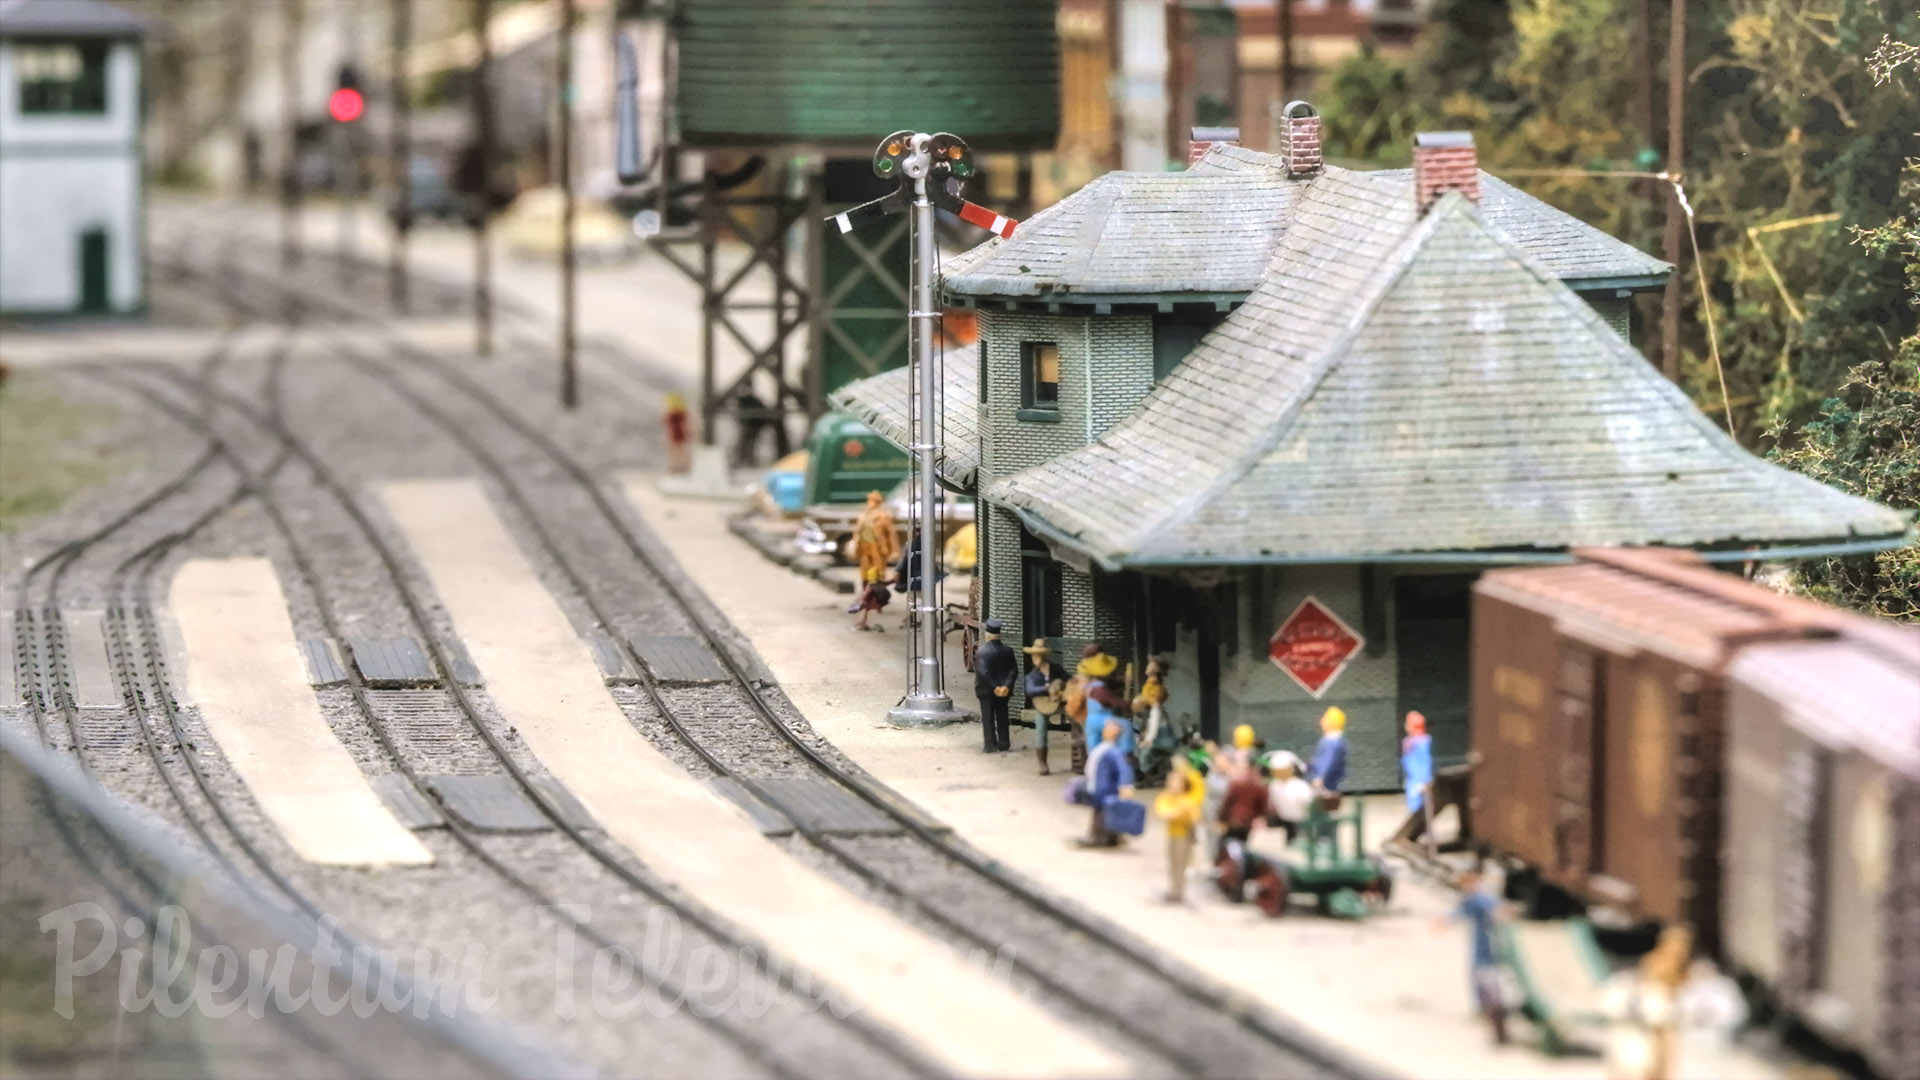 Northern Virginia Model Railroaders - One of the Largest Model Railway Layouts in the United States